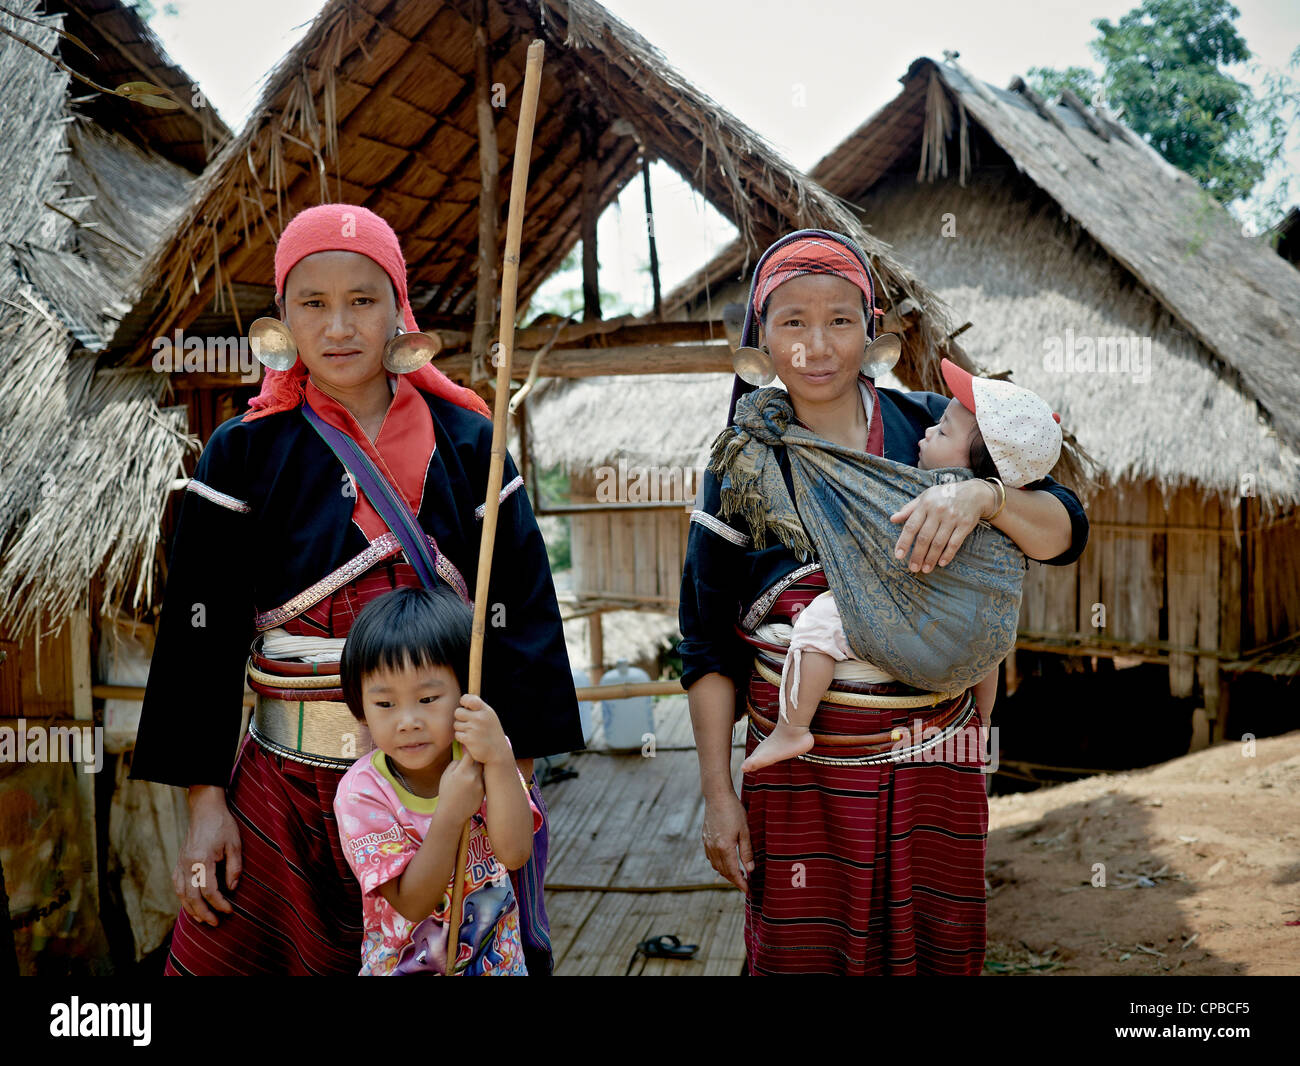 Palong (big earring) woman and children of Thailand's Northern hilltribes. Chiang Rai. Rural Thailand people S.E. Asia. Hill tribes Stock Photo